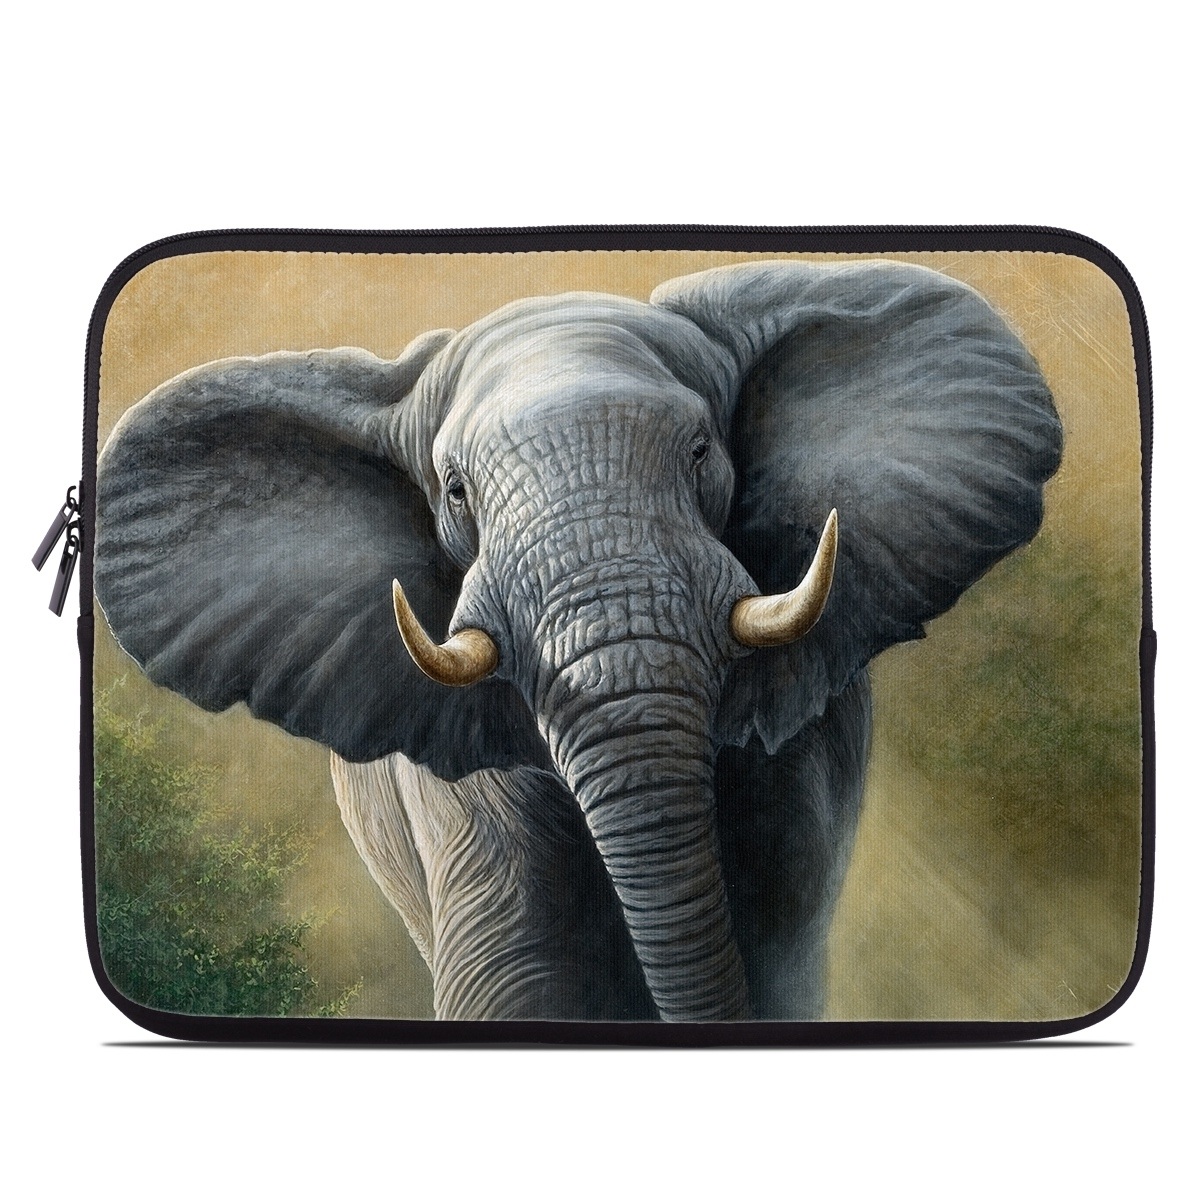 Laptop Sleeve - Right of Way (Image 1)